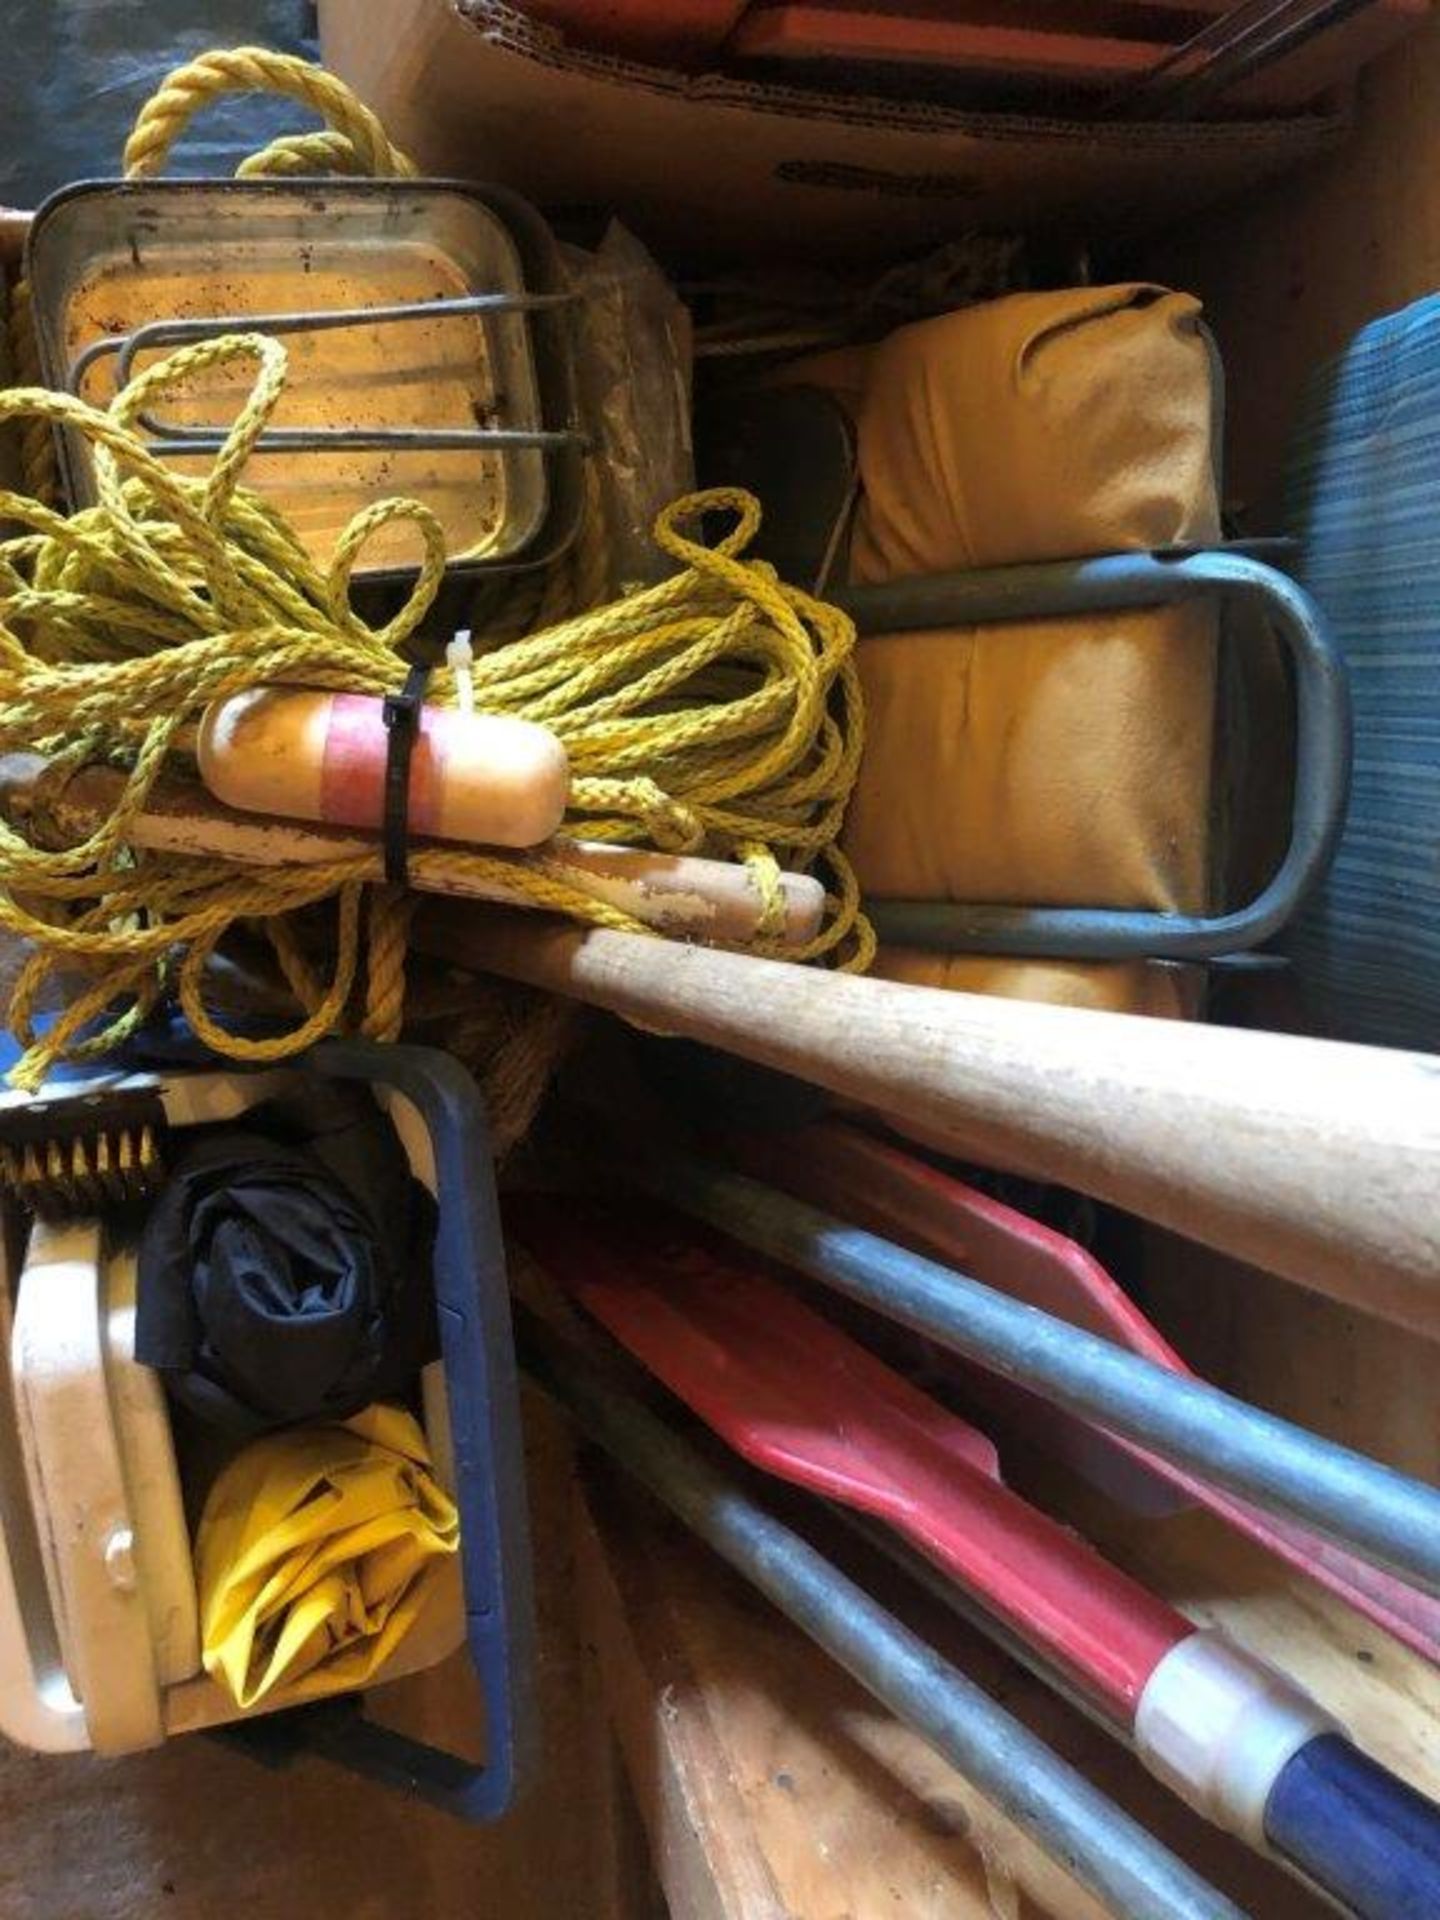 L/O ASSORTED CAMPING AND FISHING GEAR, NETS, CHAIRS, HEATER, ETC. - Image 3 of 3